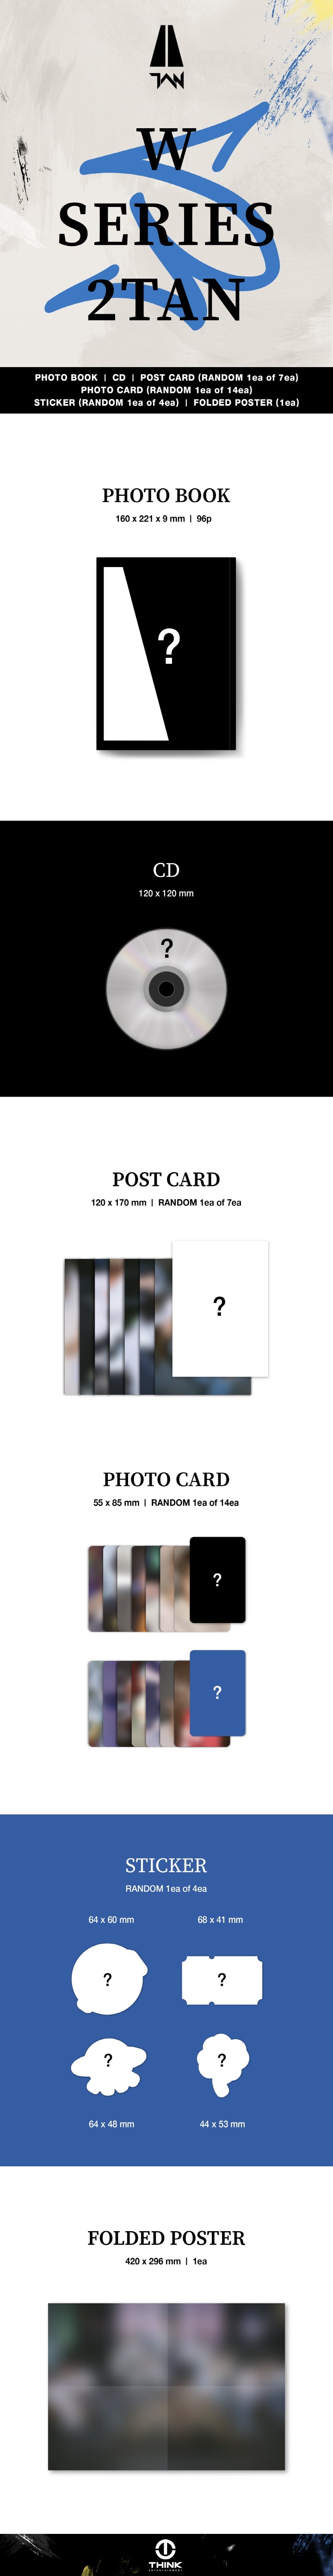 1 CD
1 Photo Book (96 pages)
1 Post Card (random out of 7 types)
1 Photo Card (random out of 14 types)
1 Sticker (random o...